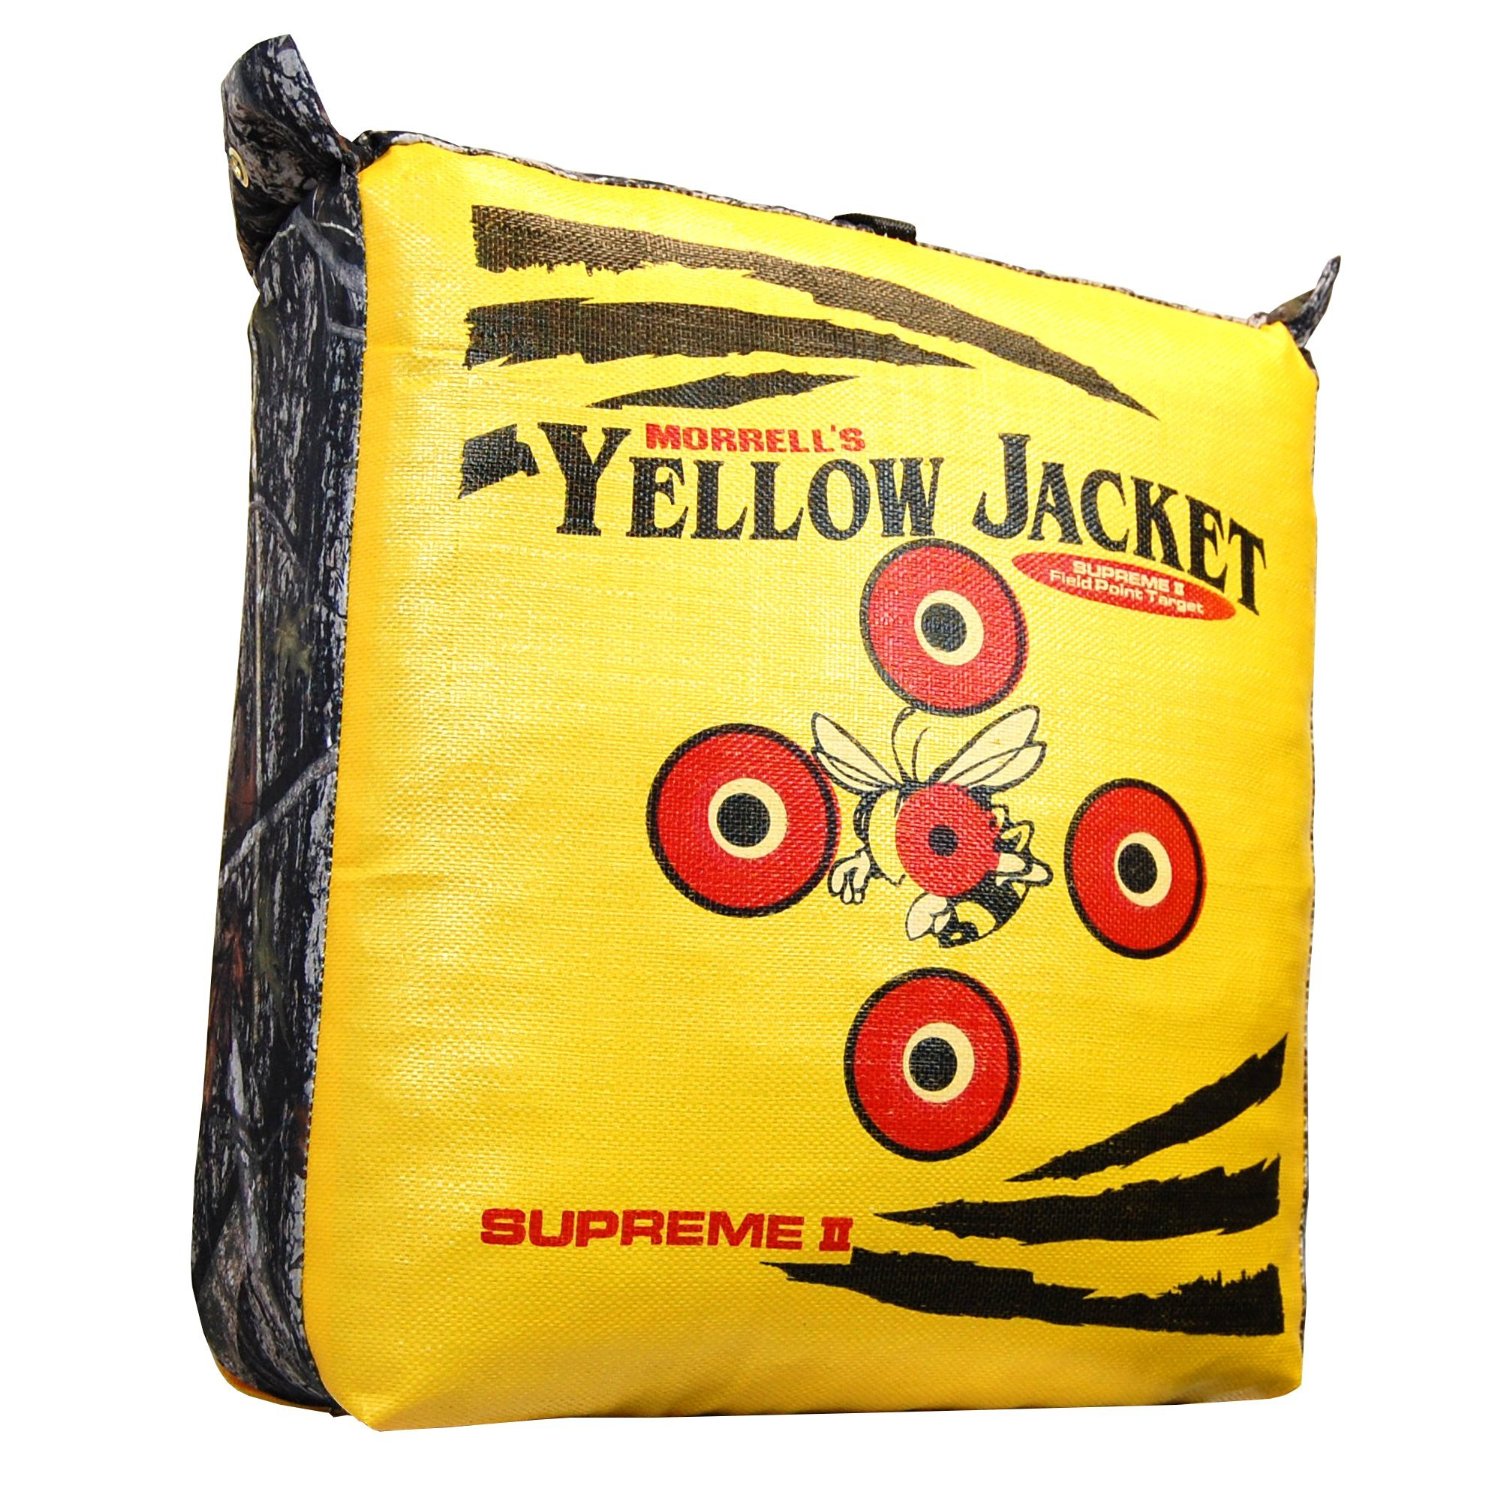 yellow jacket: best archery target for the money